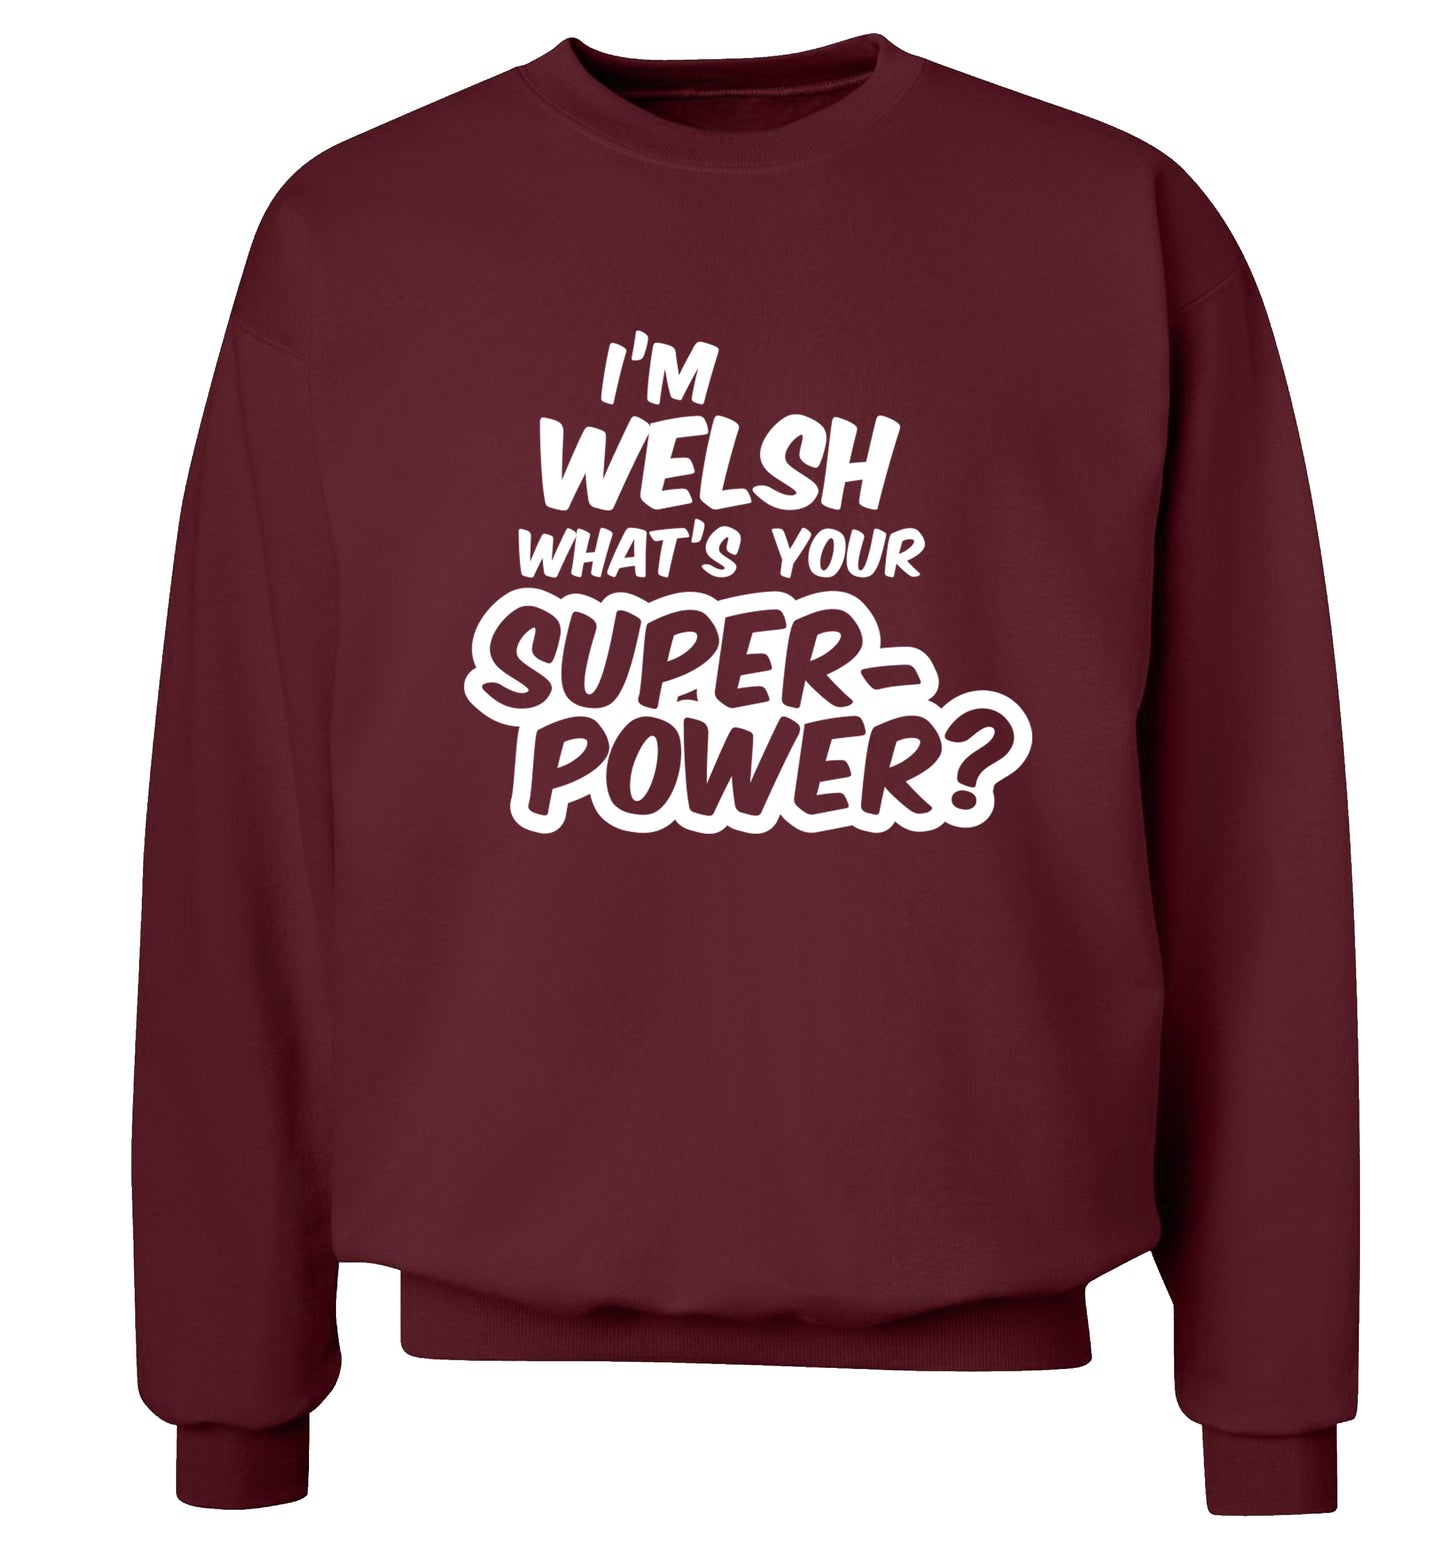 I'm Welsh what's your superpower? Adult's unisex maroon Sweater 2XL